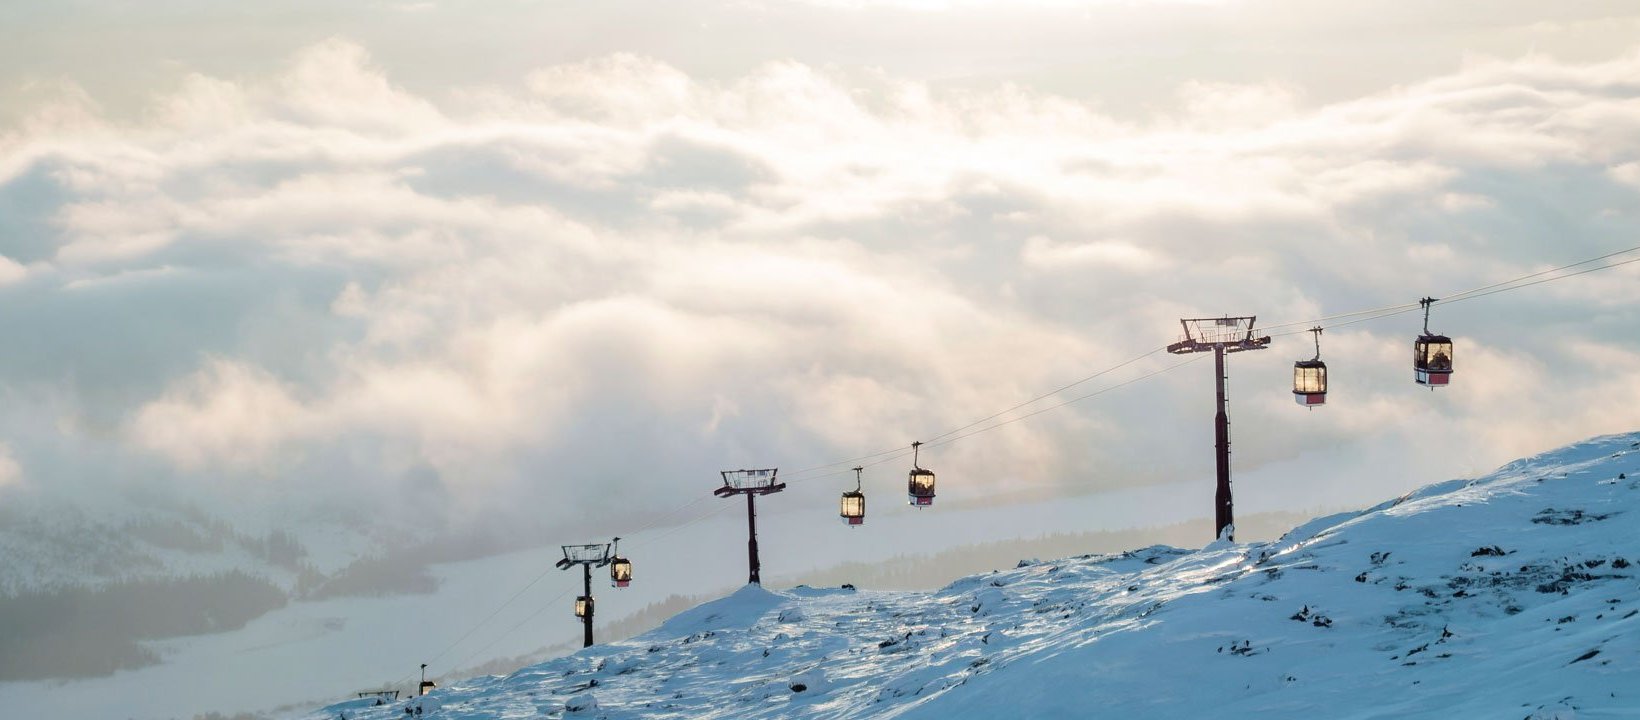 Ski lift with mountains and clouds in the background